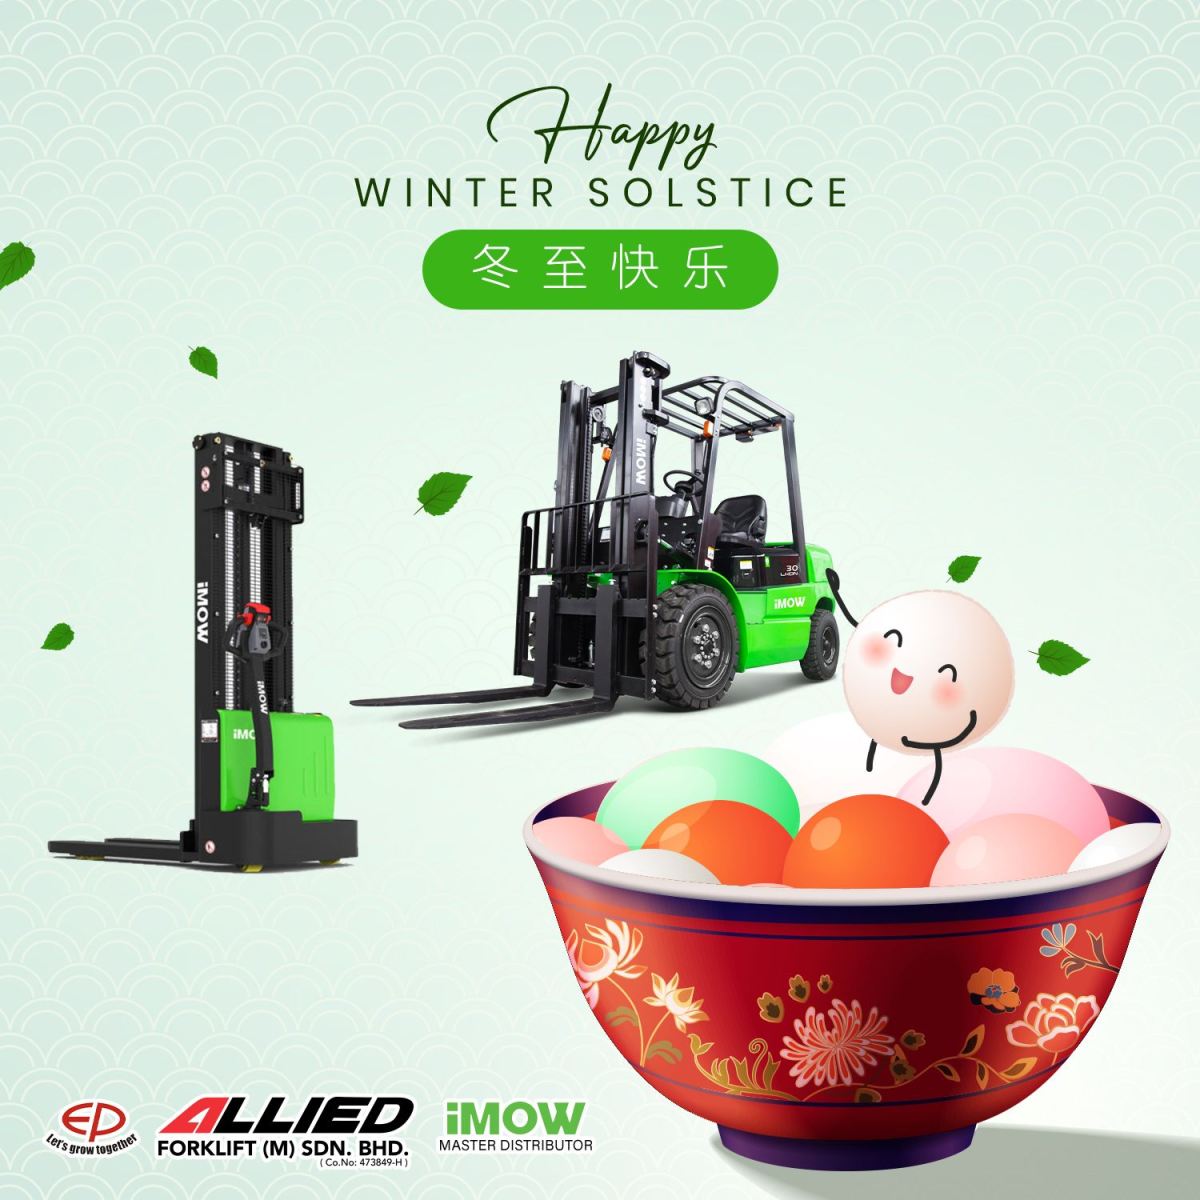 Happy Winter Solstice! Greetings From Allied Forklift�